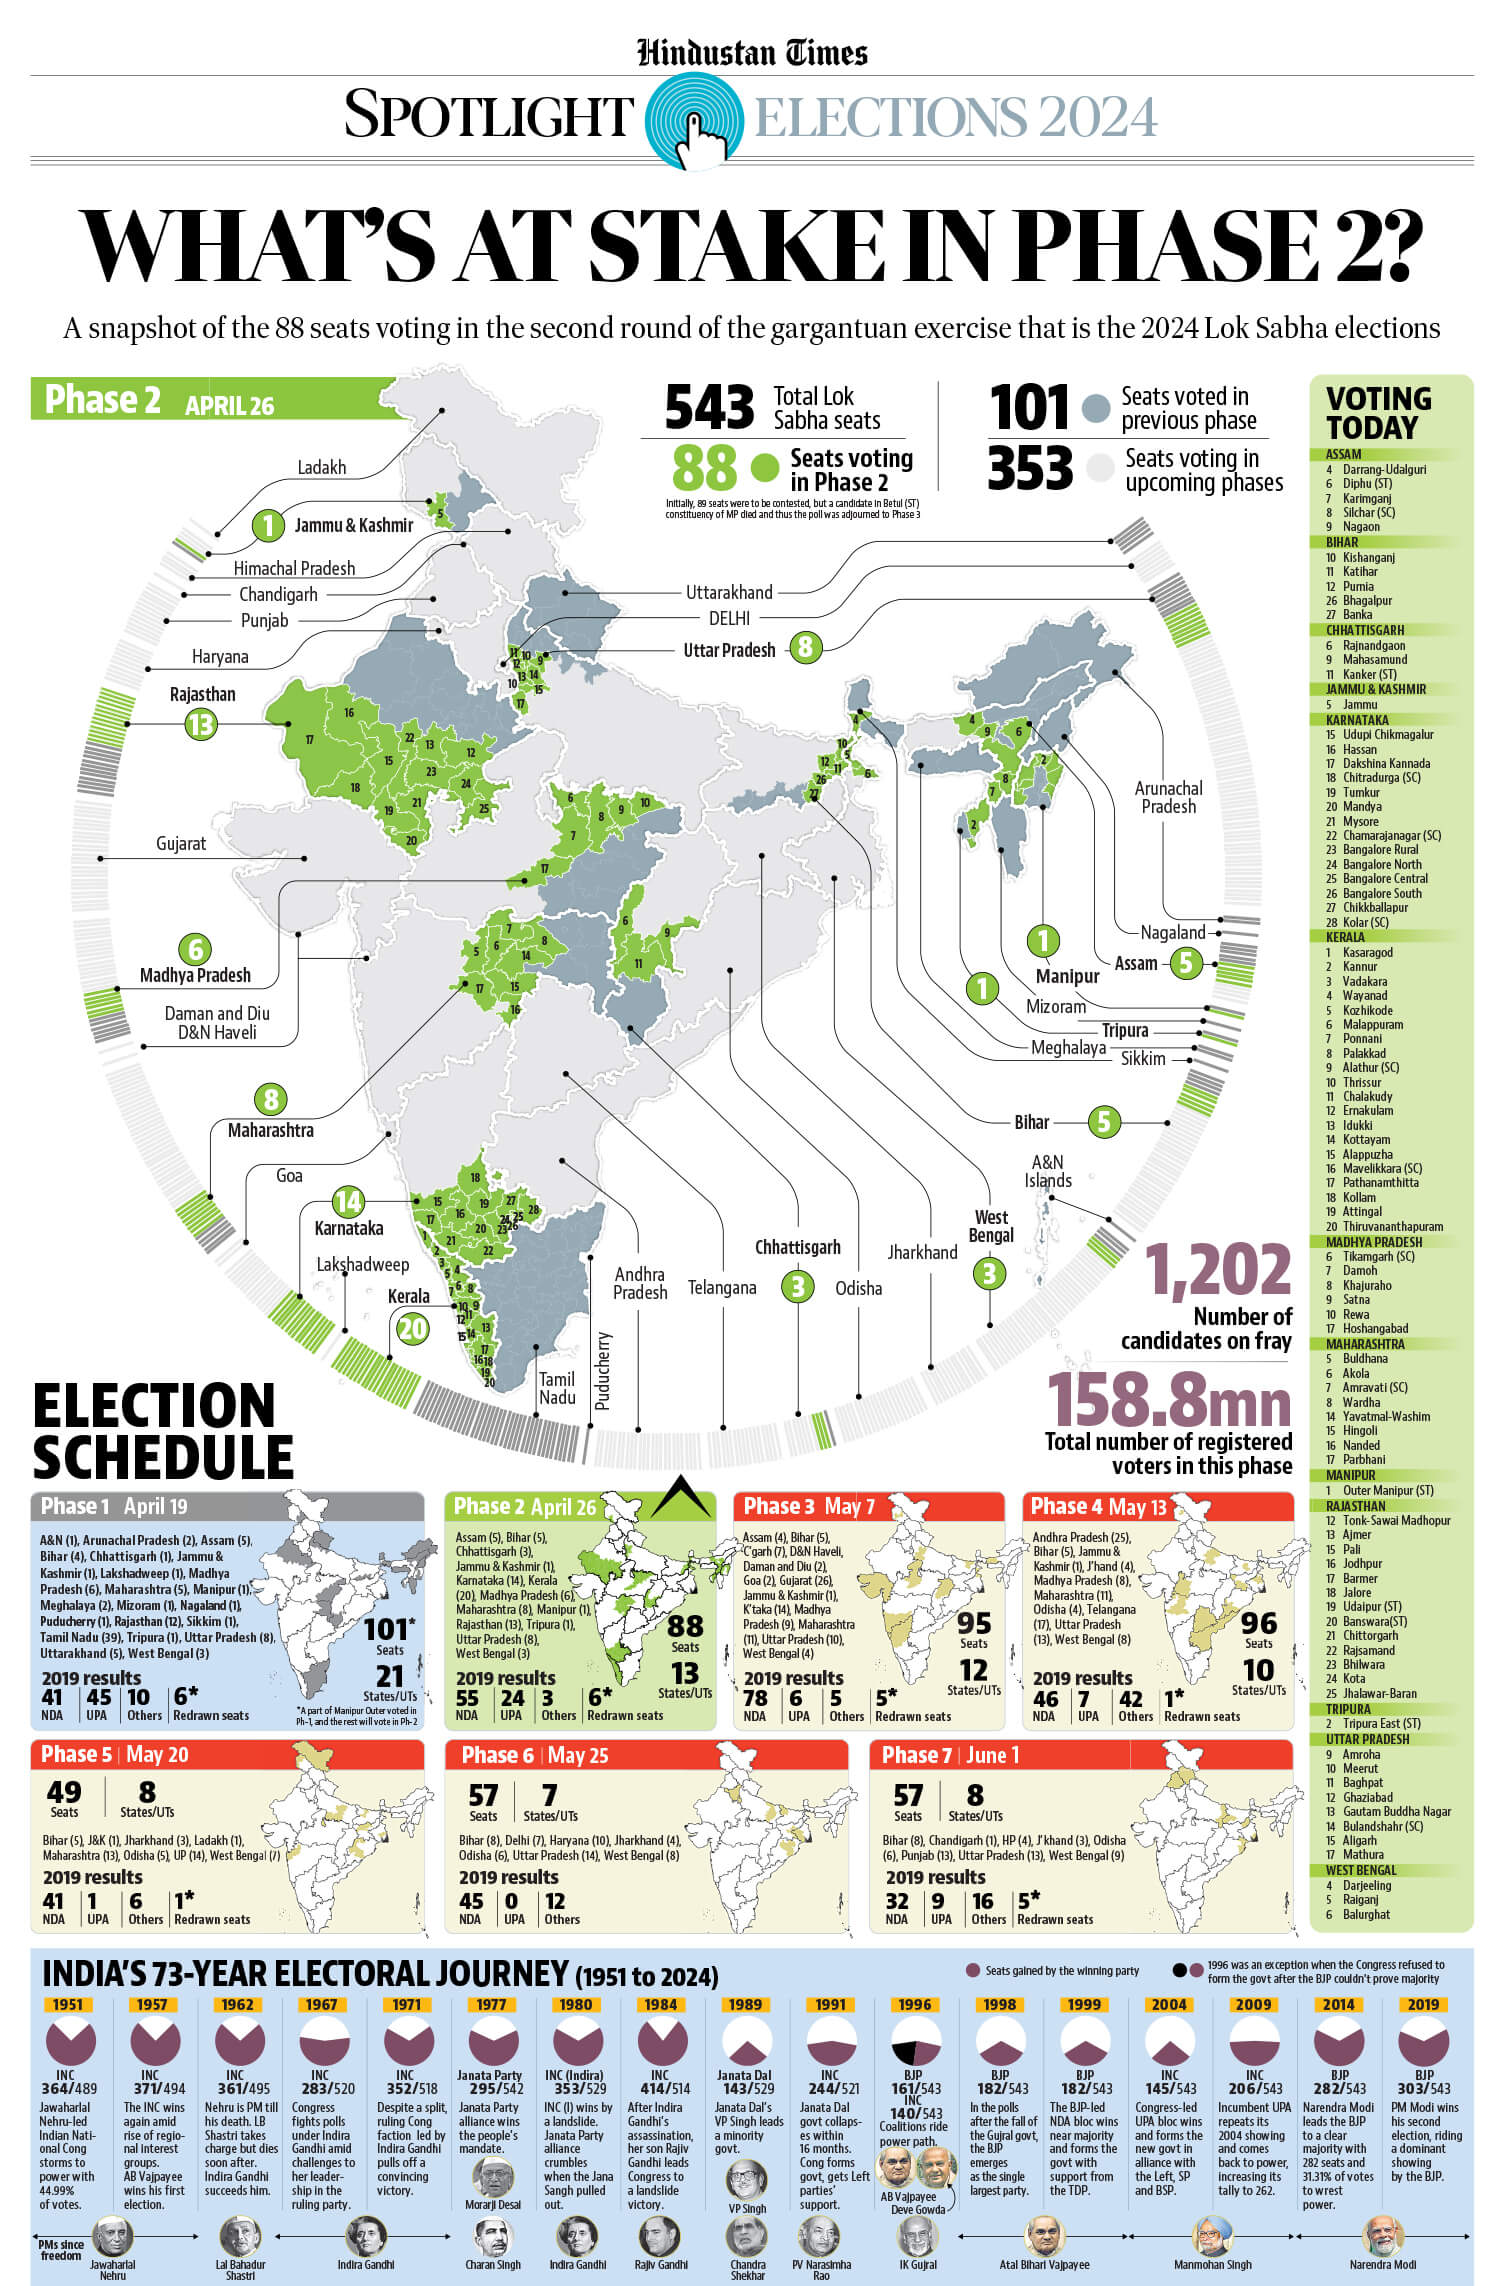 india bloc, nda less cohesive in second phase of lok sabha elections